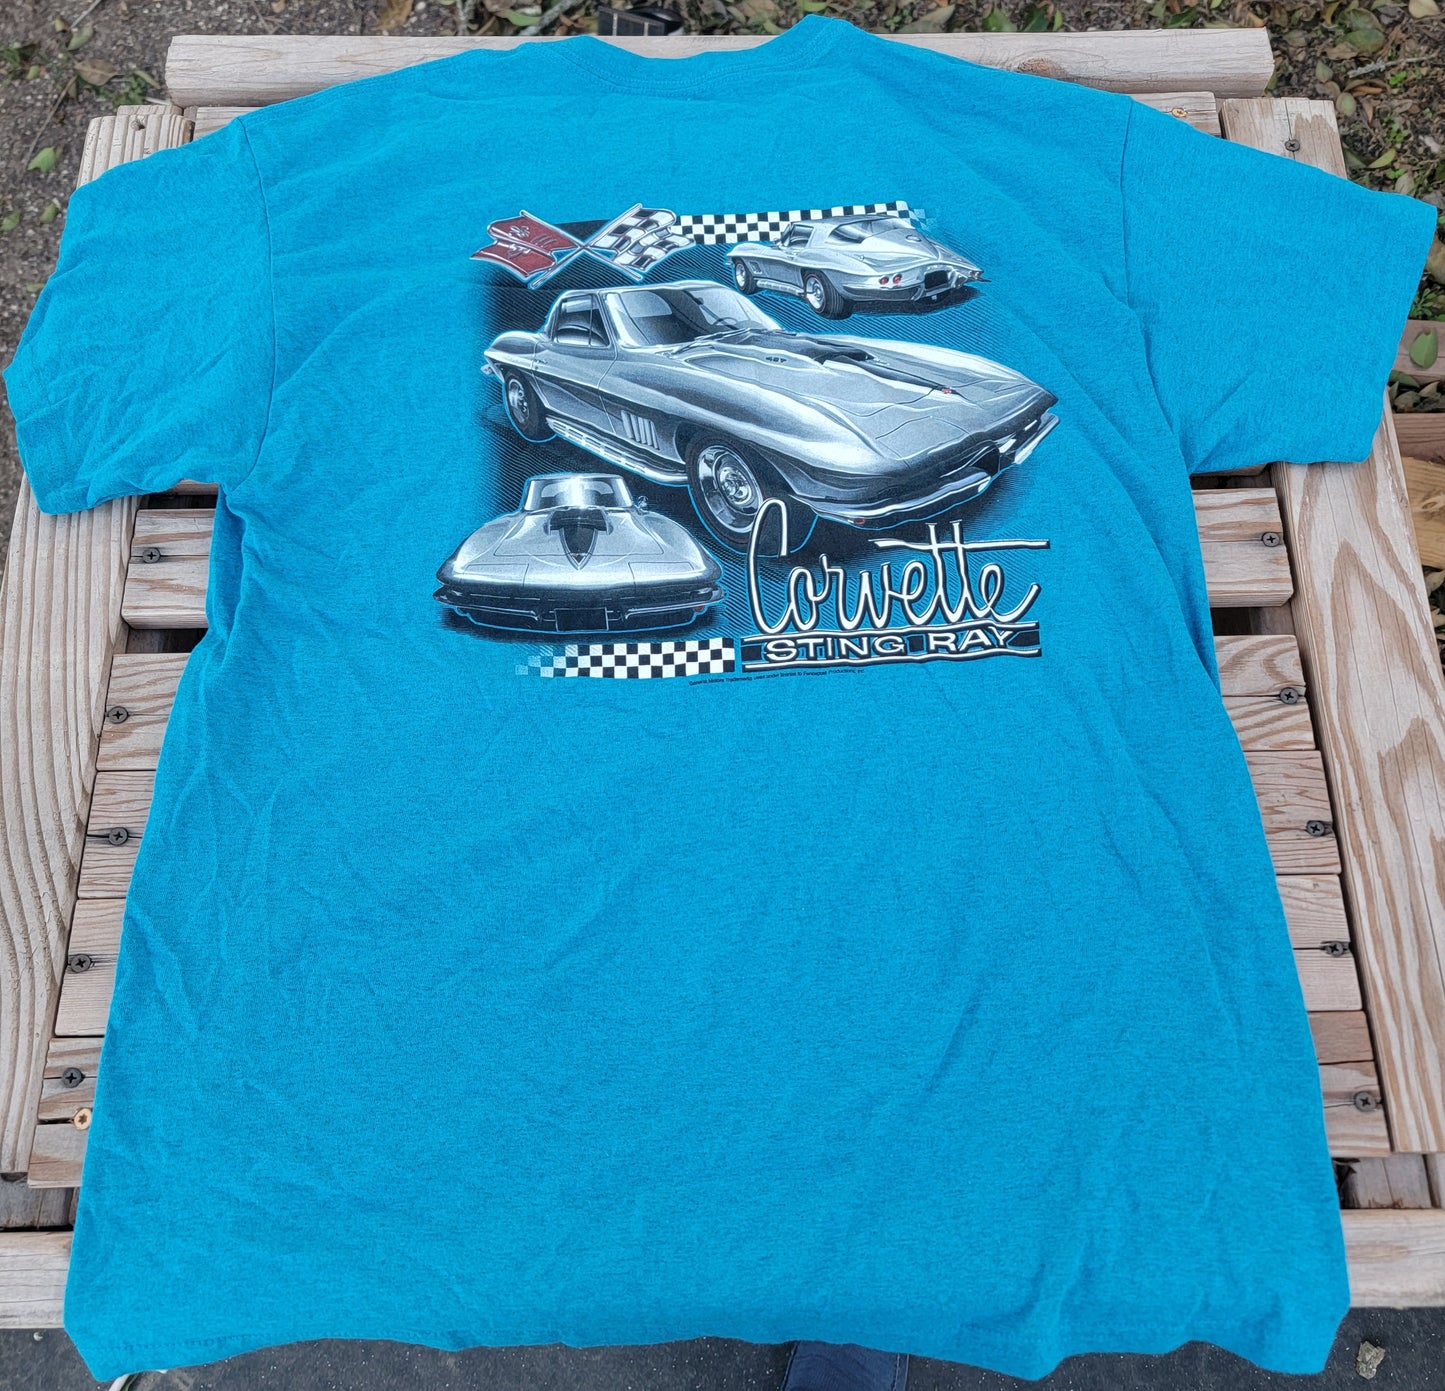 Brand new corvette sting ray large t-shirt
brand new blue corvette stingray large t-shirt. shirt has three angles of silver stingray on the back. t-shirt is in near perfect condition.